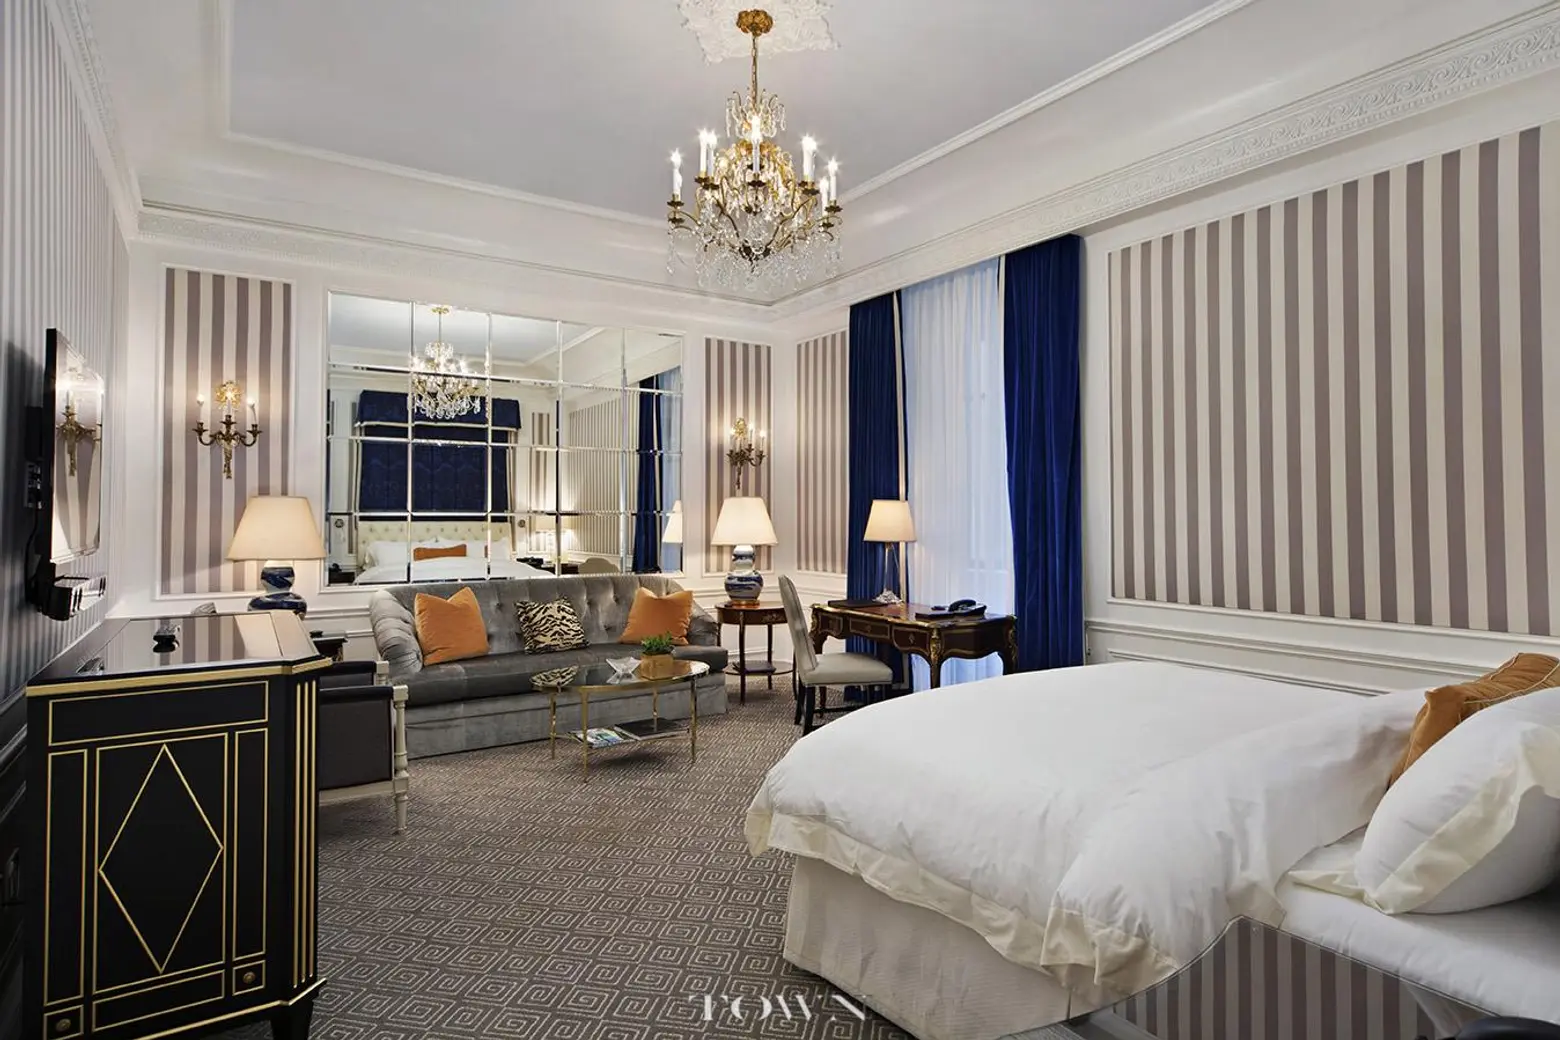 Spend 28 days a year in a ‘glamorous’ studio timeshare at the St. Regis for $165,000